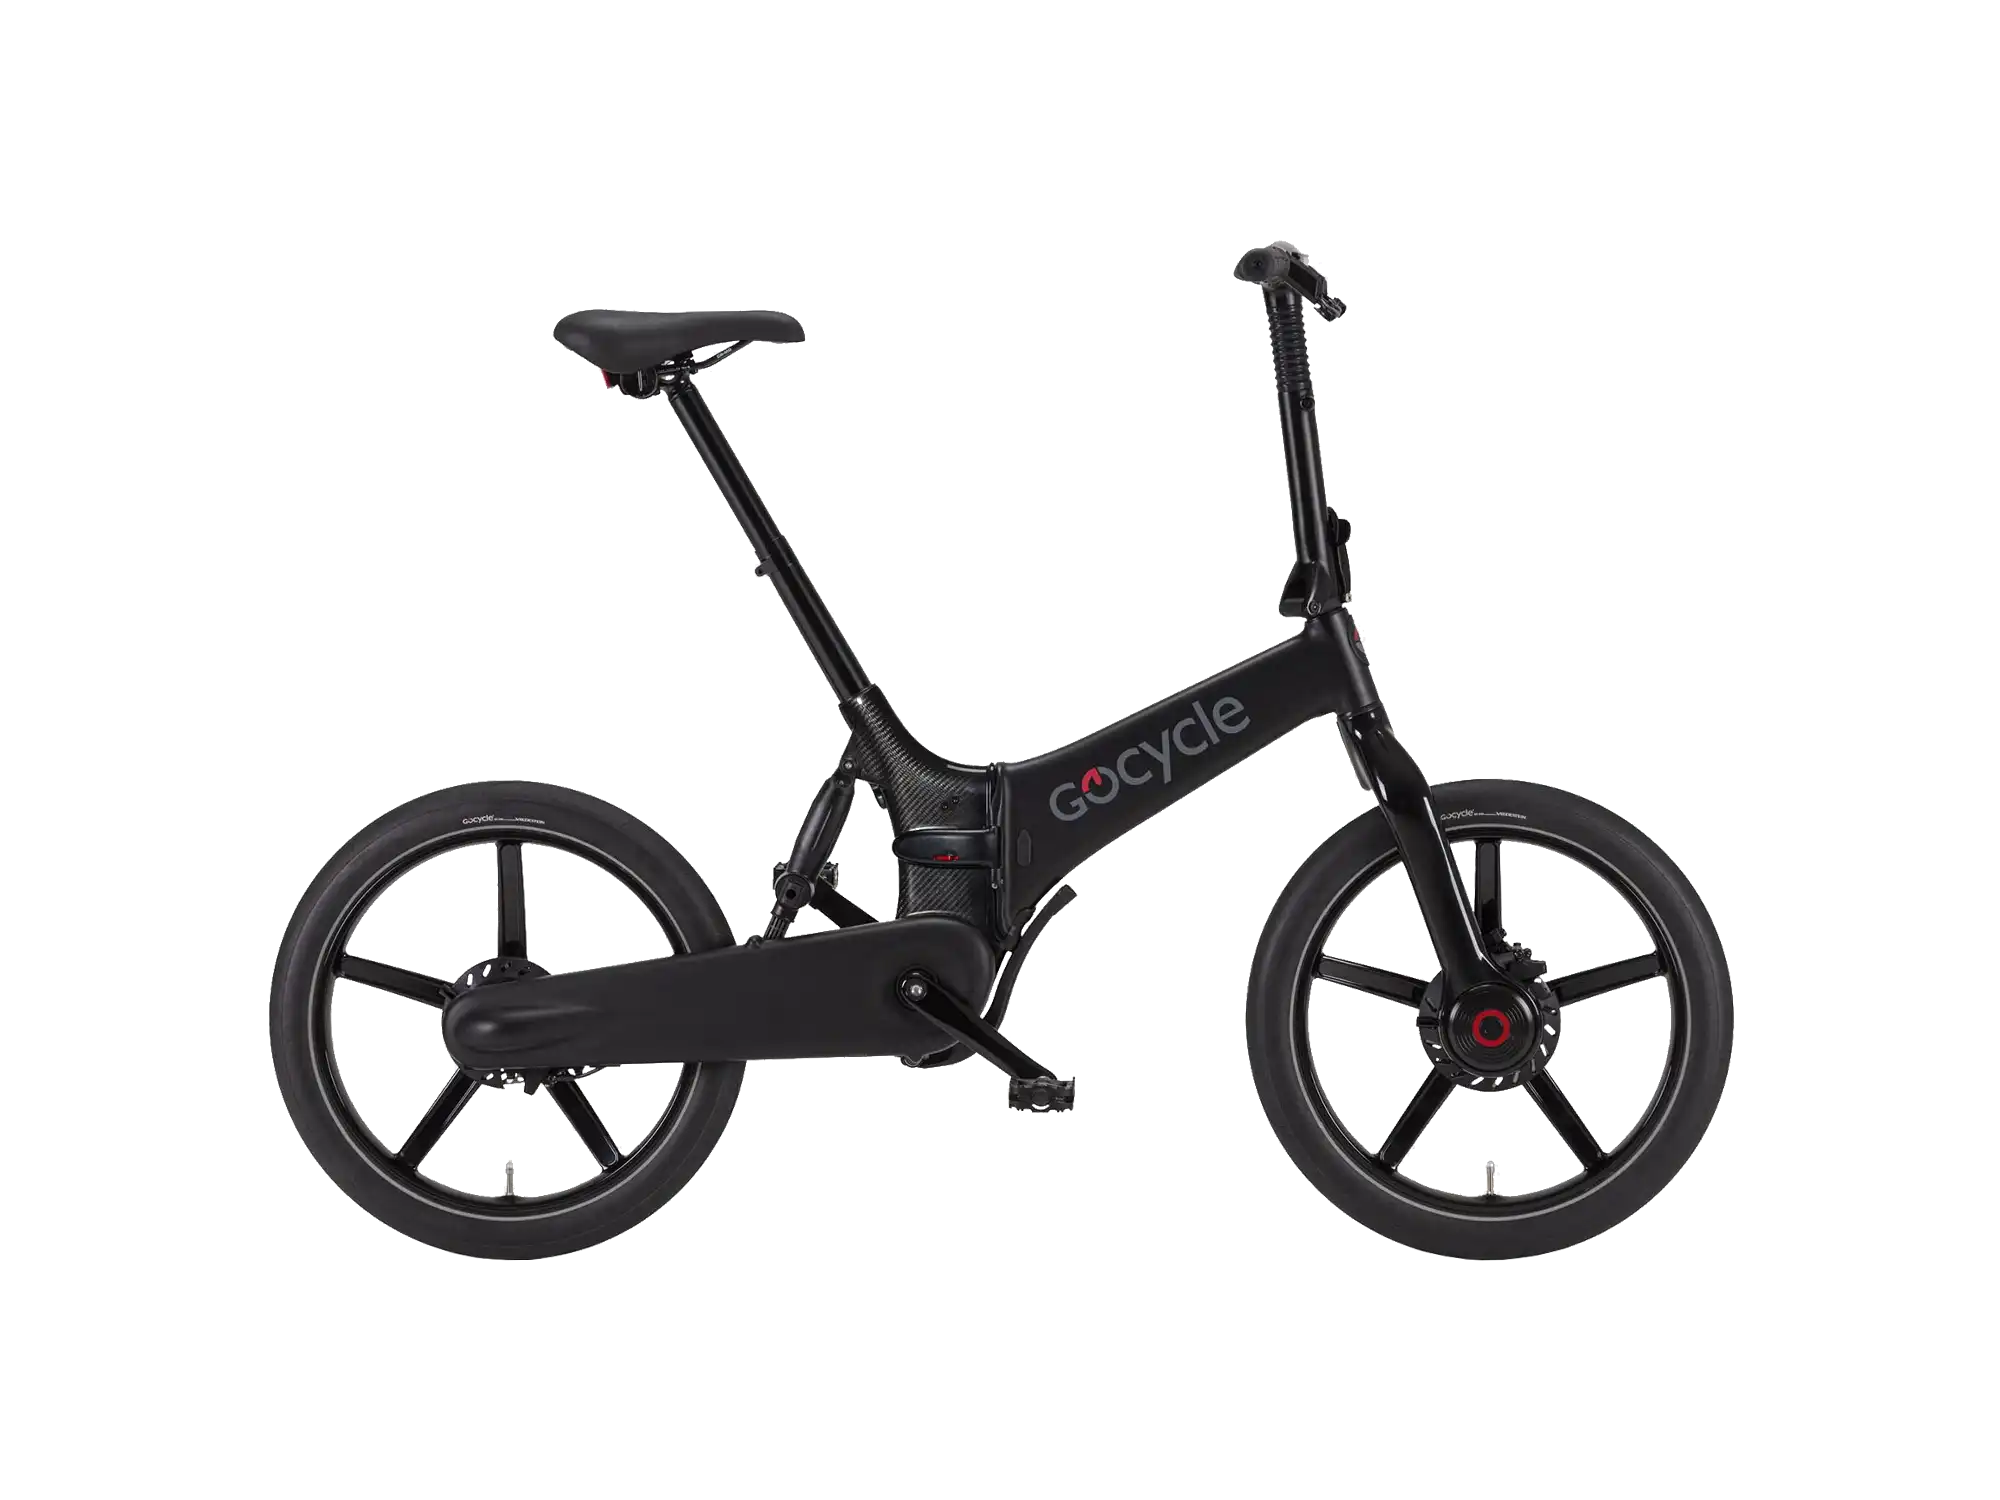 2021 Gocycle G4i Review